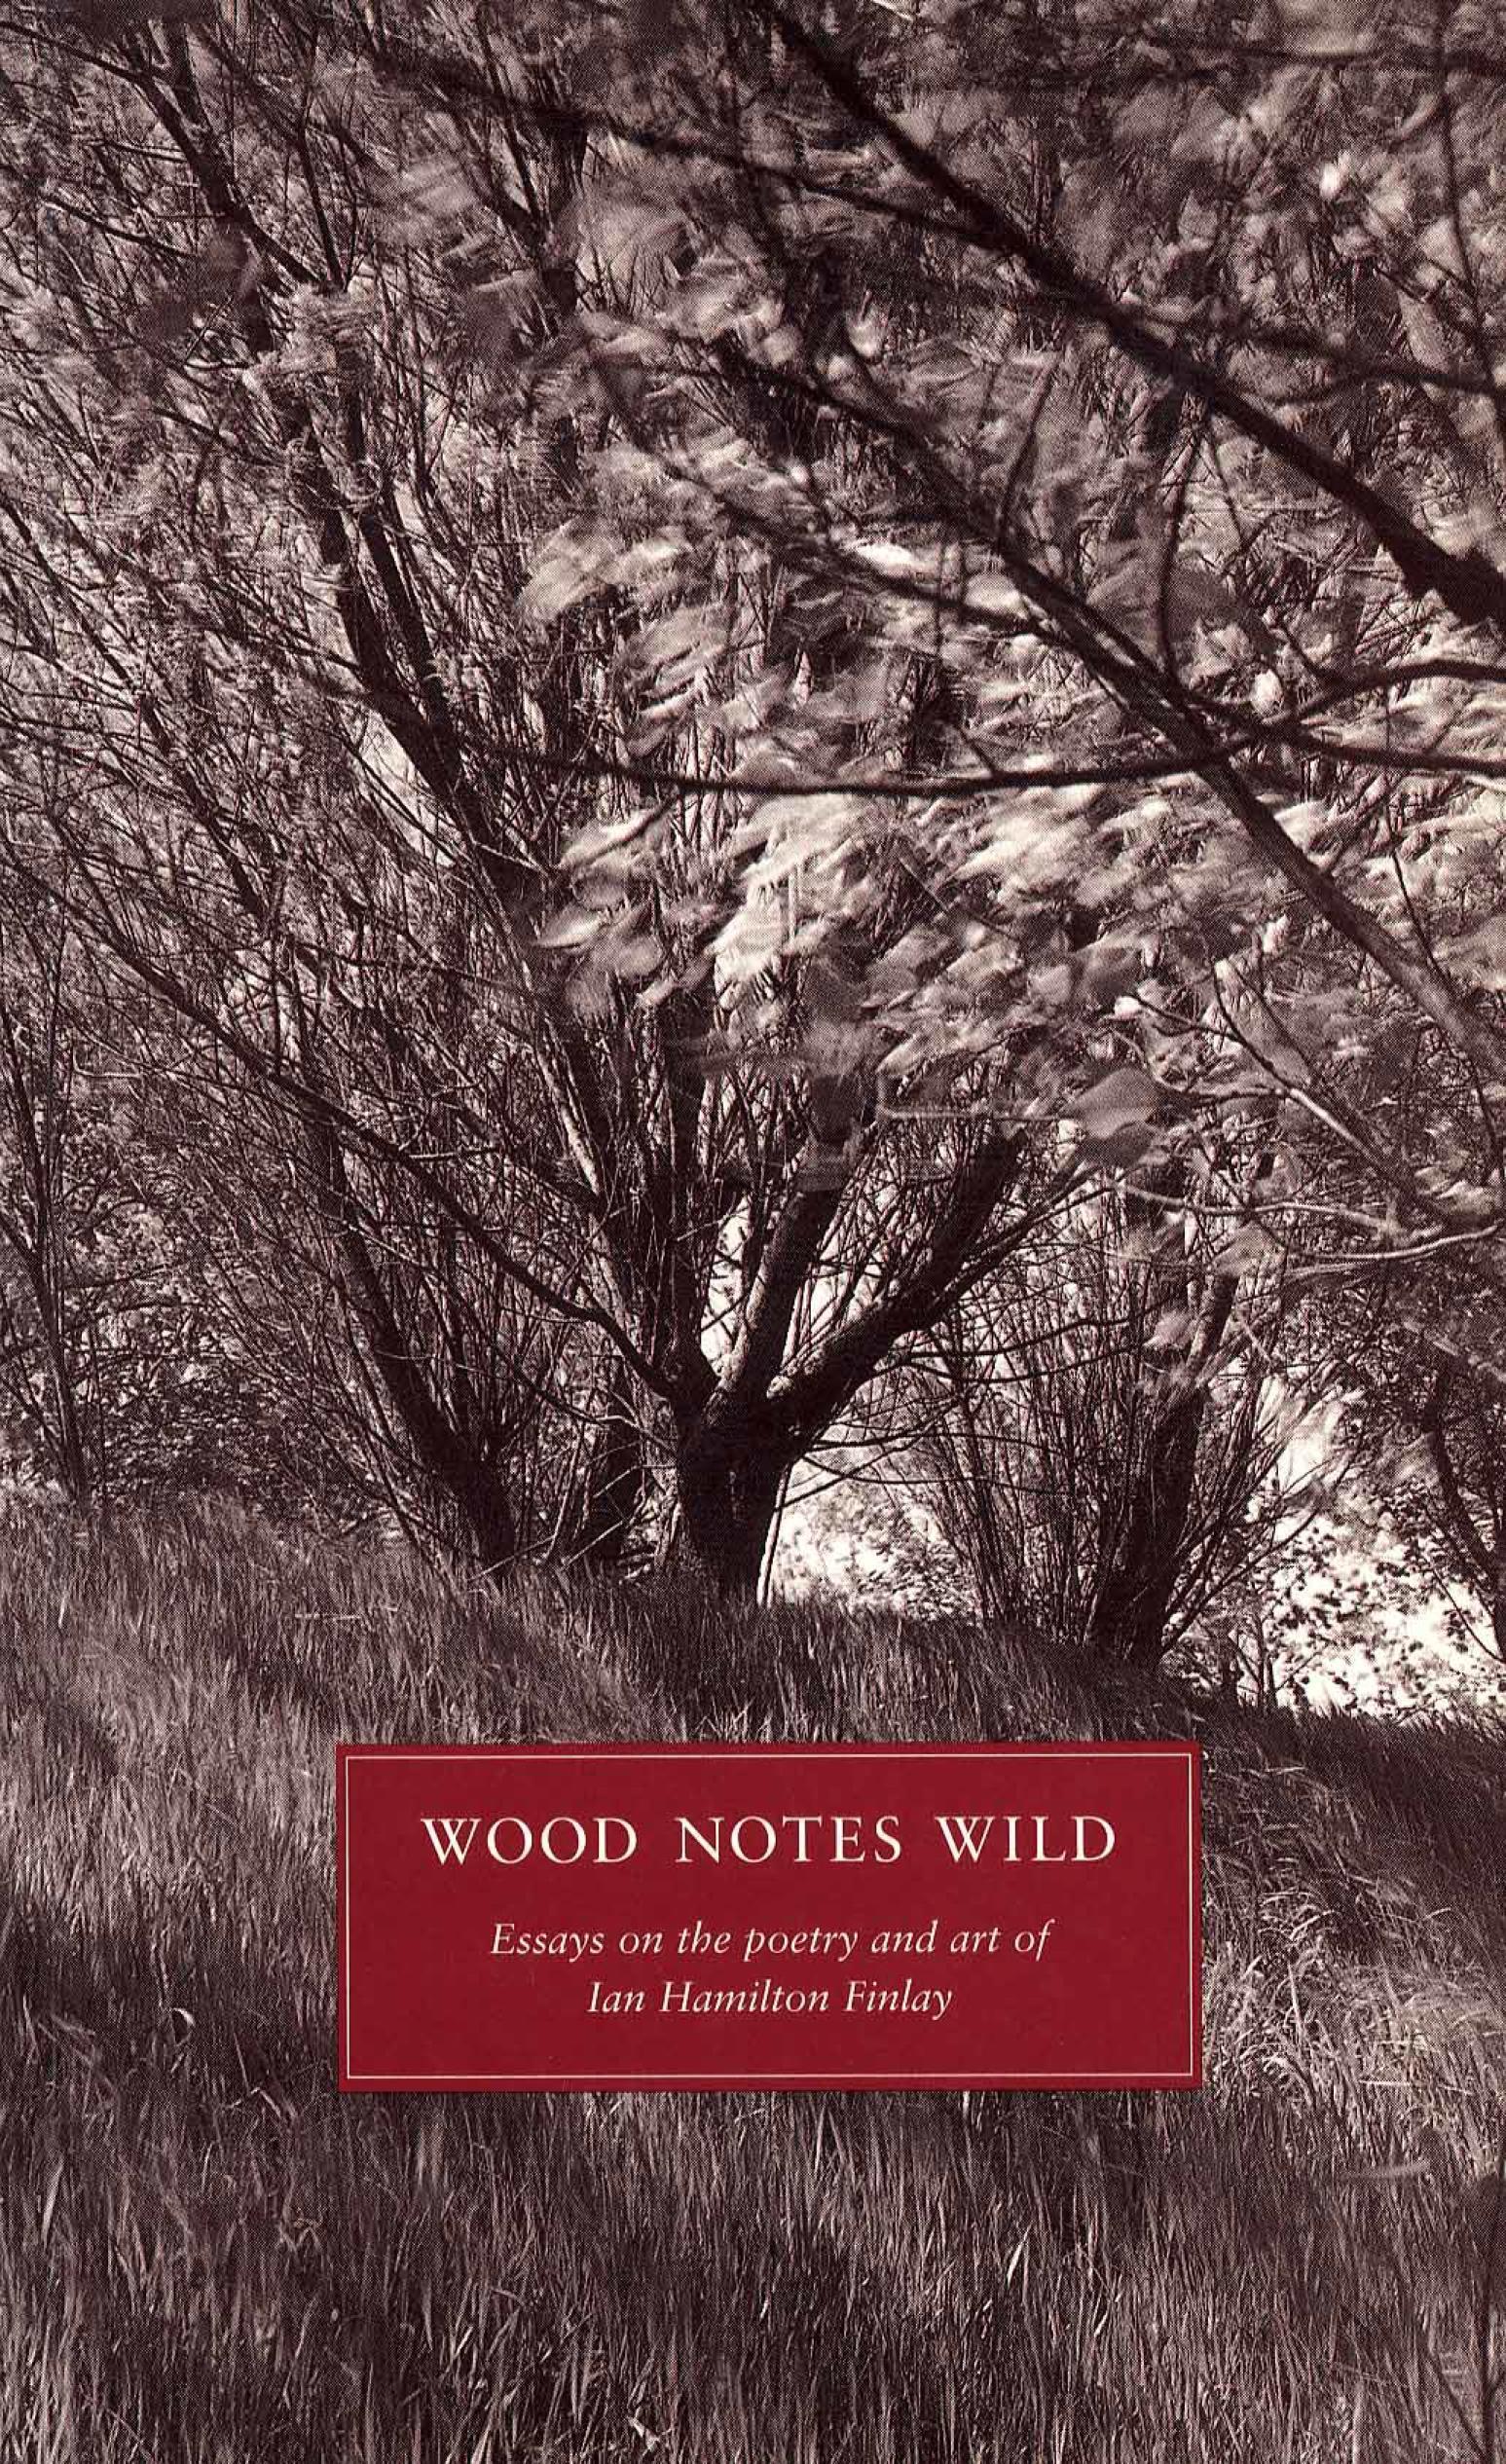 Wood Notes Wild: Essays on the Poetry and Art of Ian Hamilton